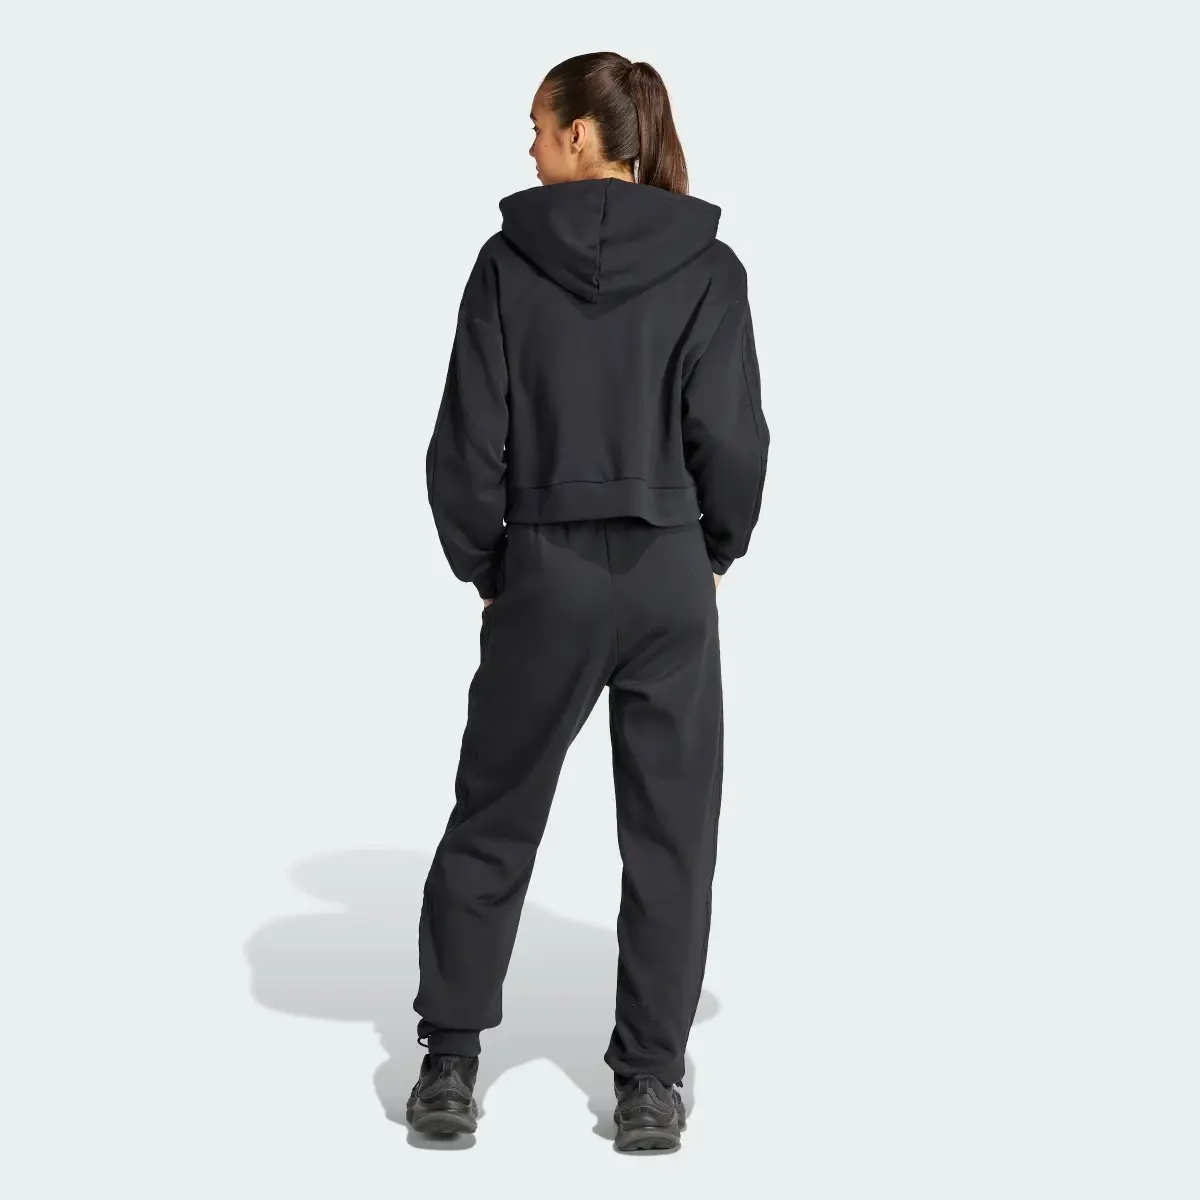 Adidas Linear Track Suit. 3